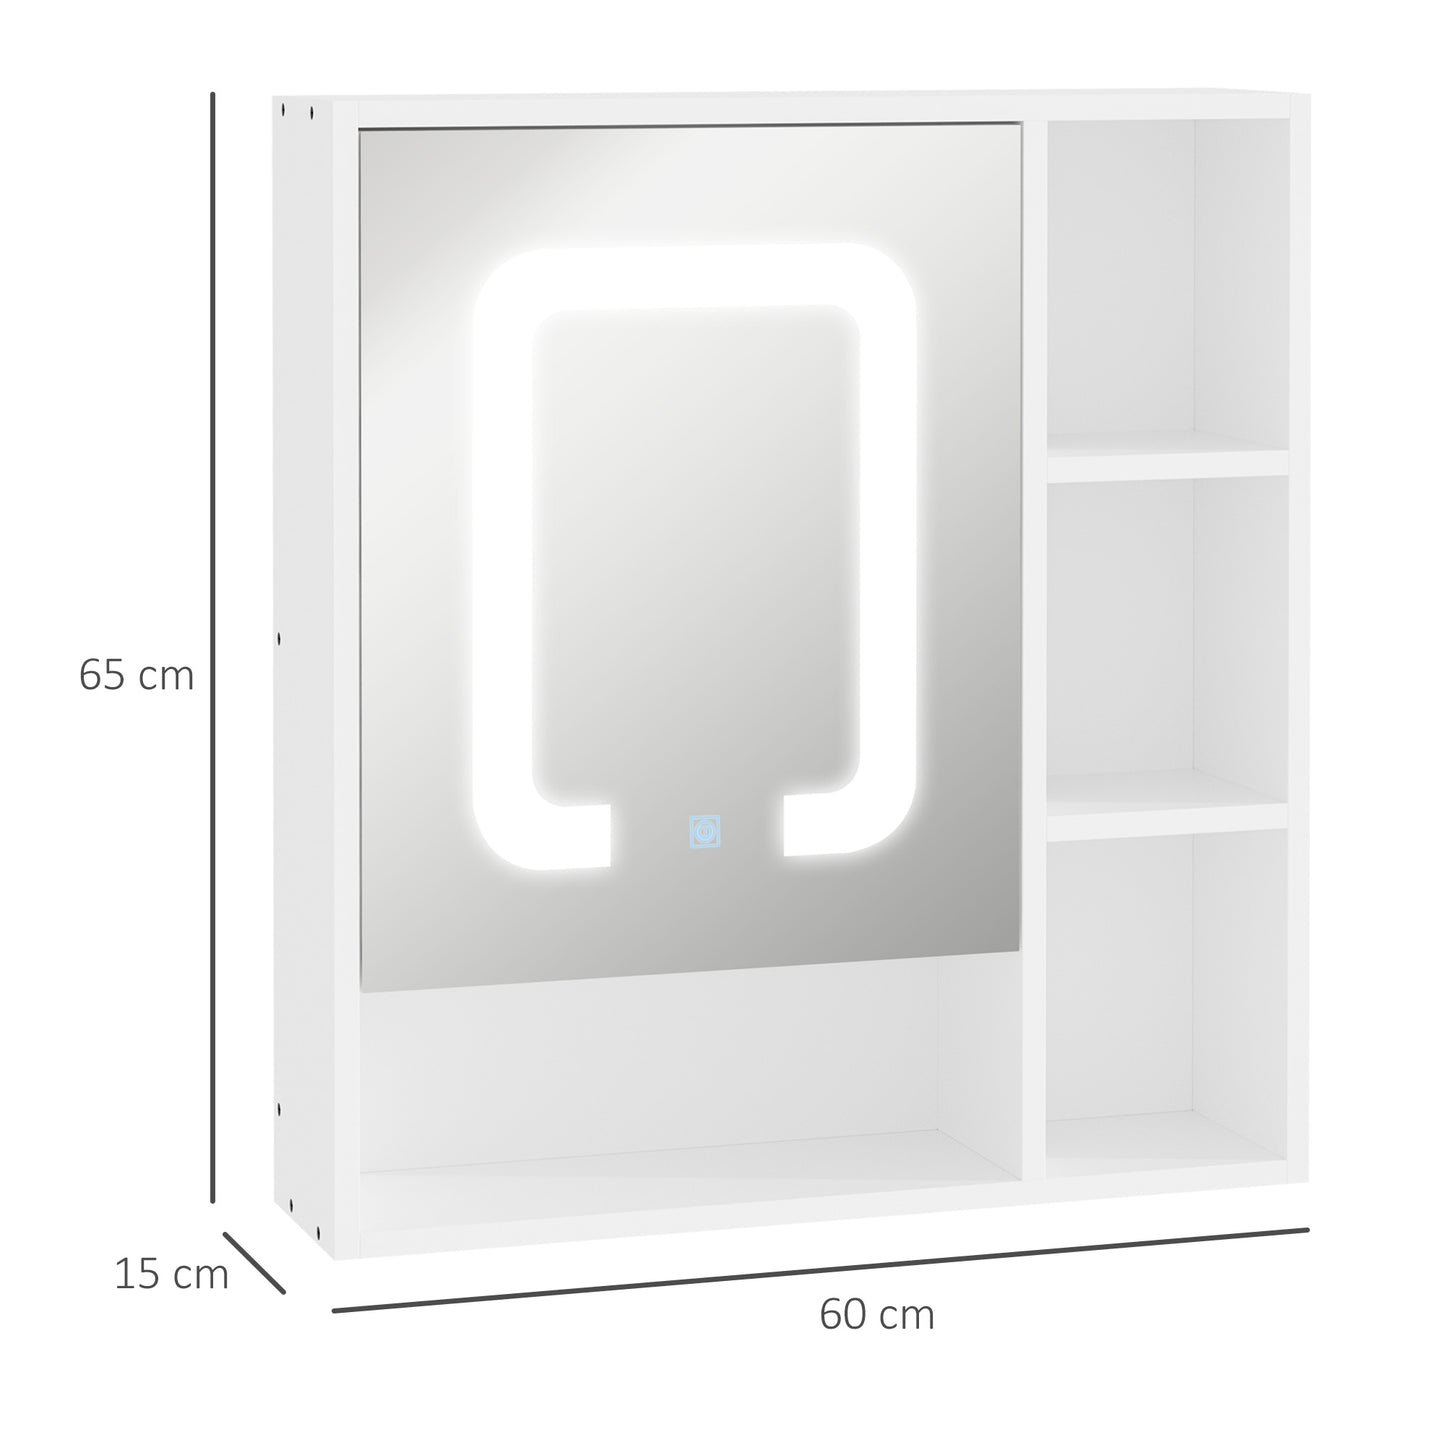 kleankin LED Illuminated Bathroom Mirror Cabinet, Wall-mounted Storage Organizer with Four Open Shelves, Dimmable Touch Switch, White w/ 4 Shelf